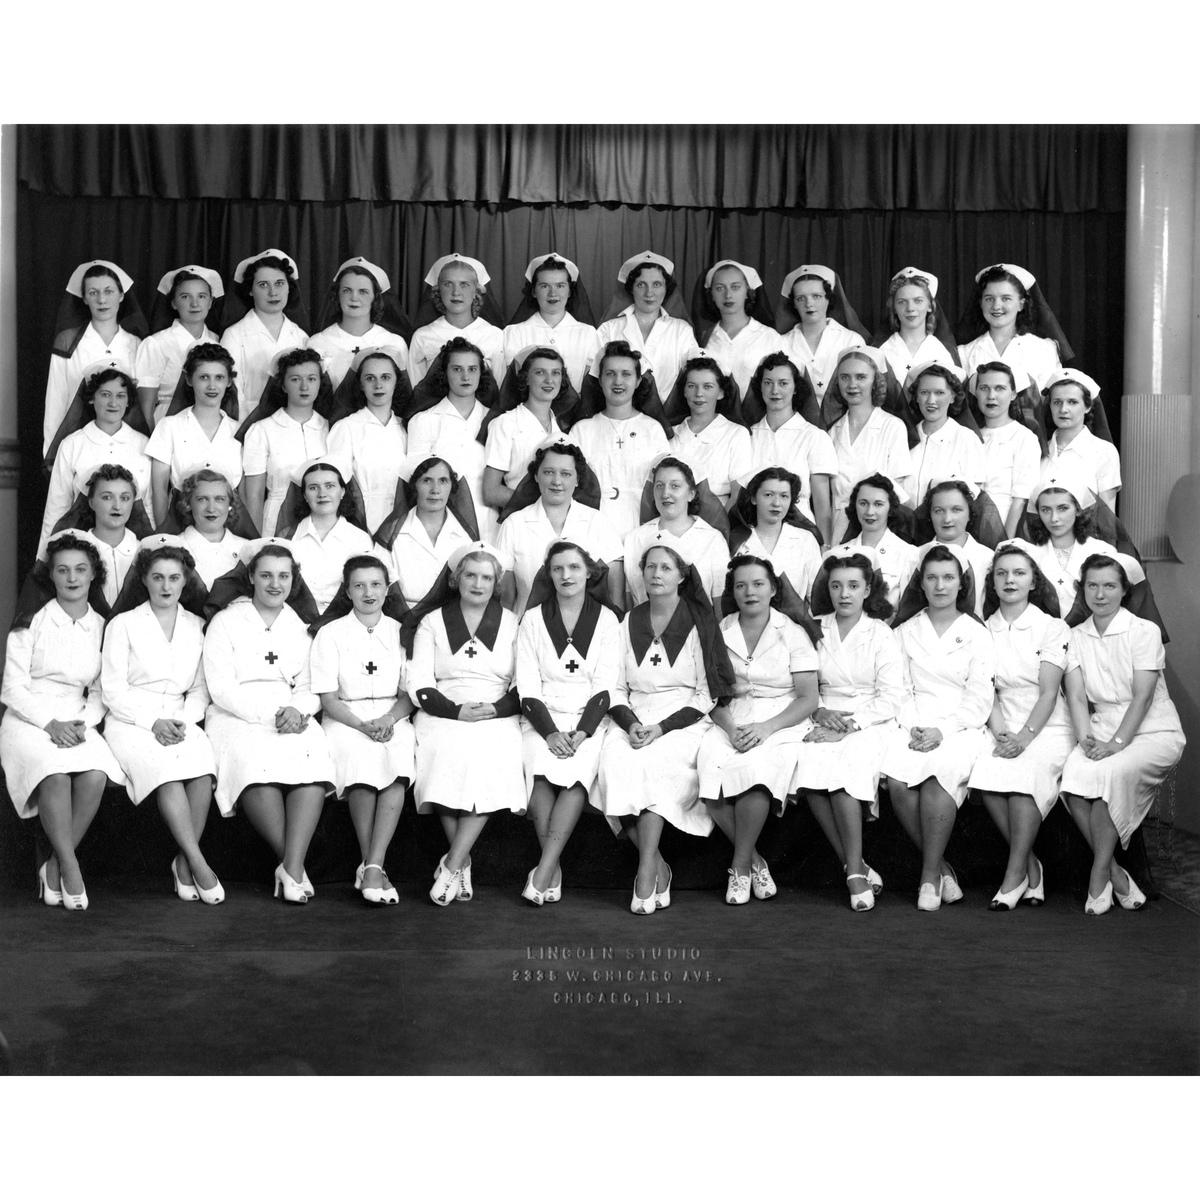 Polish Chapter of the American Red Cross, Chicago, IL 1941-1944 squared.jpg